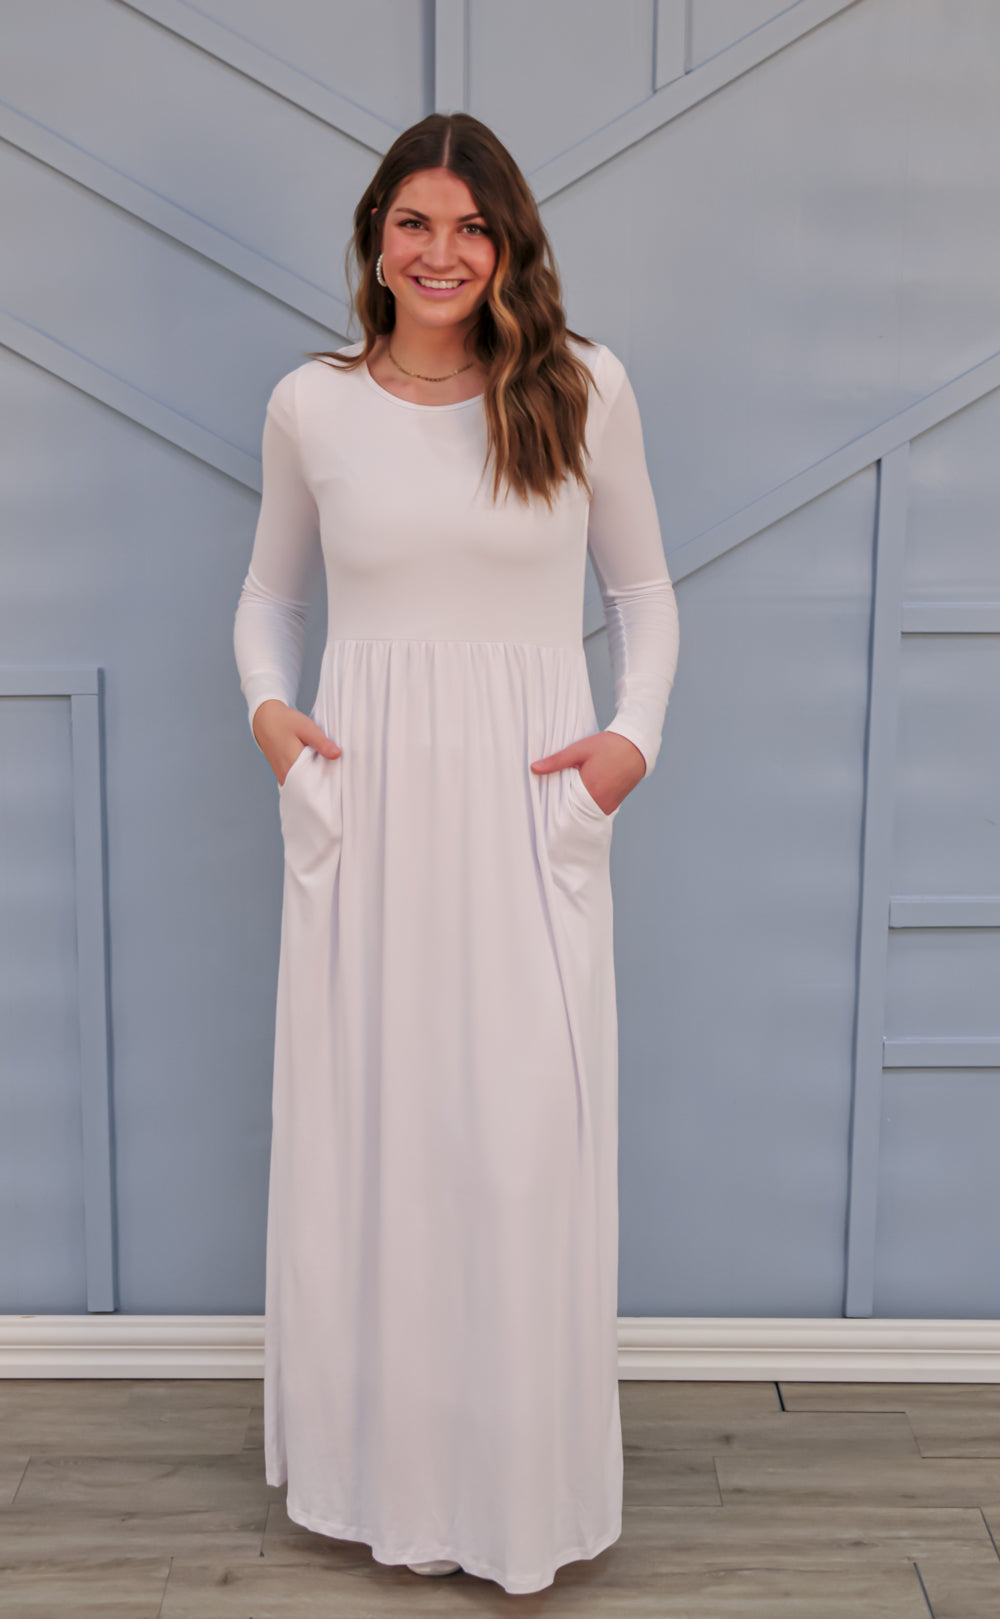 White Elegant Womens Temple Dresses & Baptism Gowns | Dressed in White